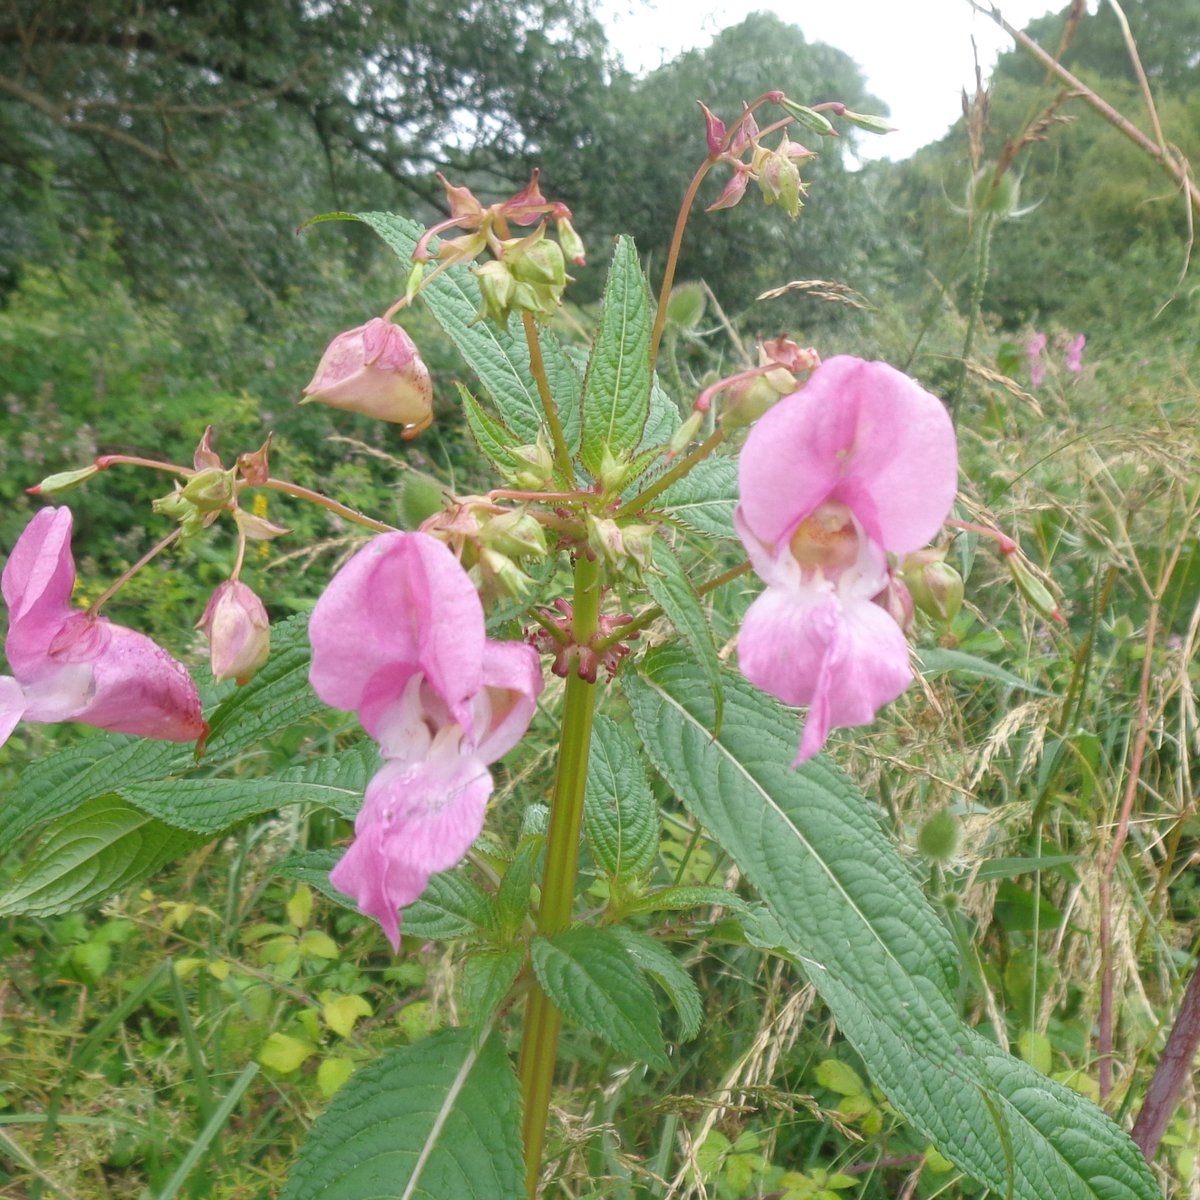 💜Some pretty pinky purple wildflowers seen whilst walking along river banks this week. Purple Loosestrife, Marsh Woundwort & Himalayan Balsam. #Wildflowerhour #Wildflowers #RiverNene #RiverGreatOuse #Northamptonshire #Cambridgeshire #SpottedOnMyWalk